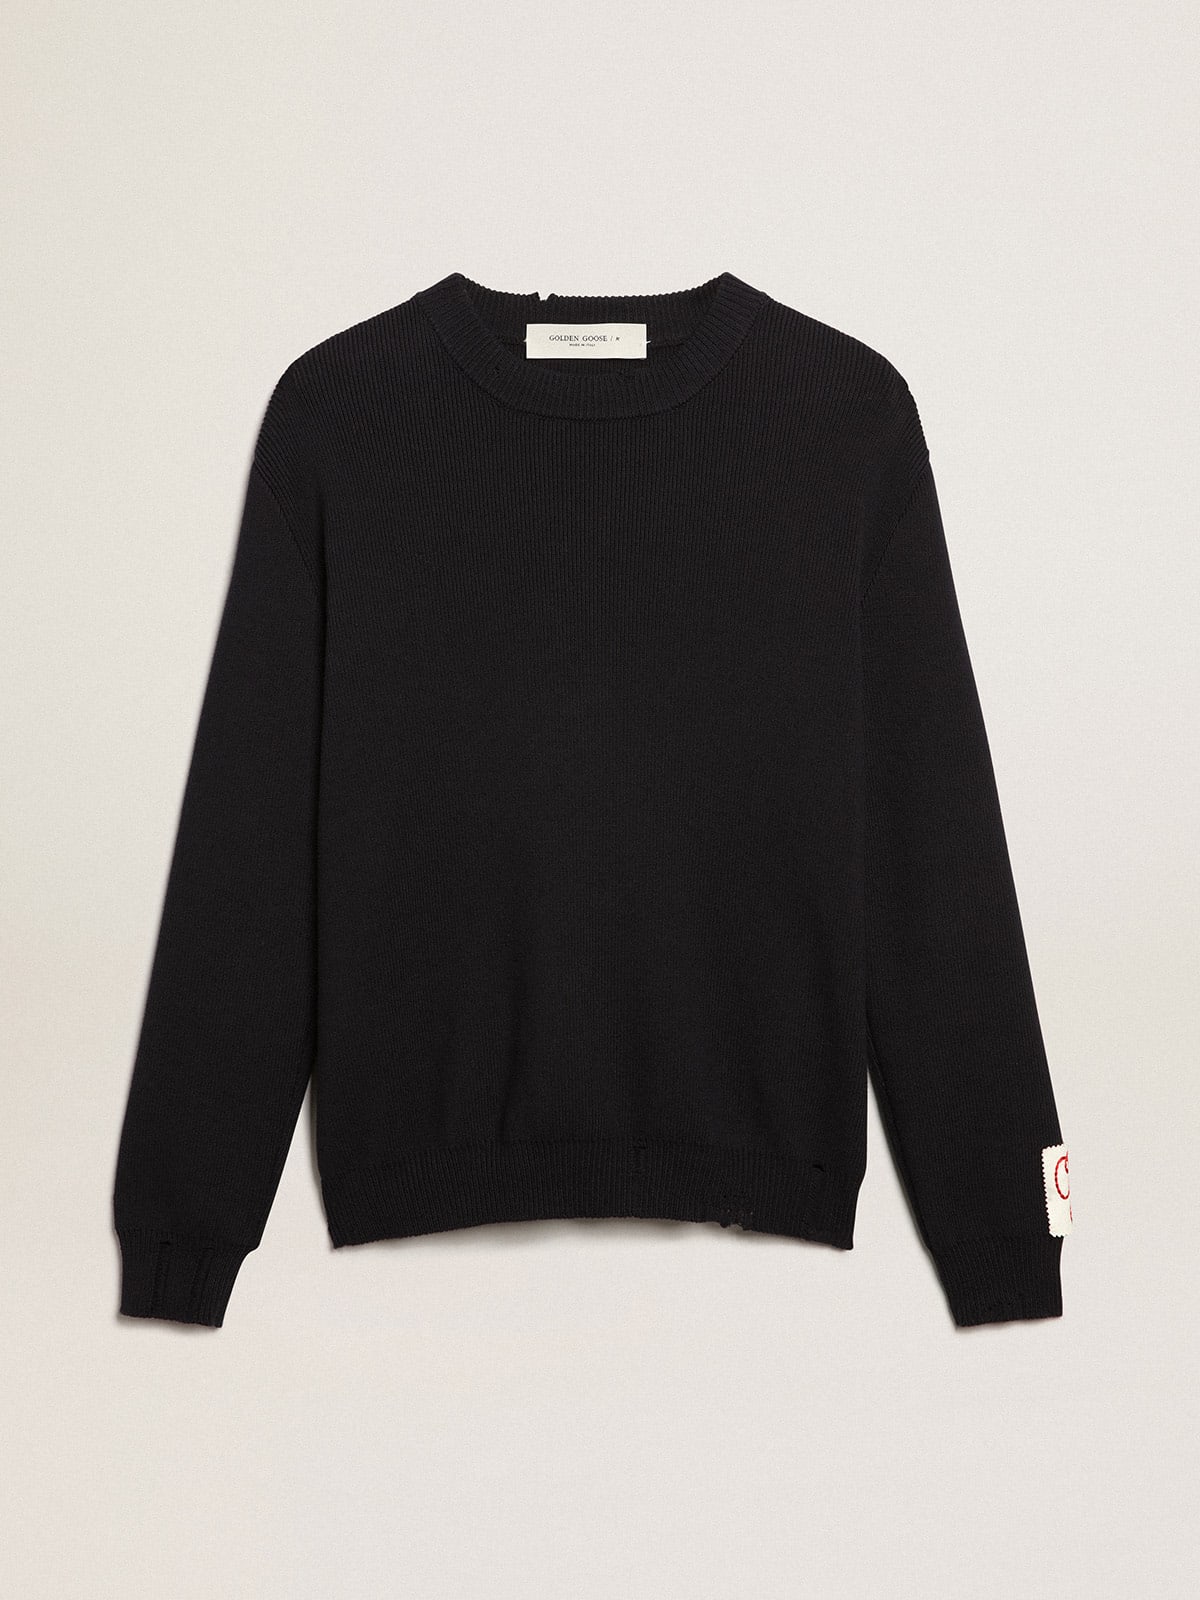 Round-neck sweater in dark blue cotton with a distressed treatment